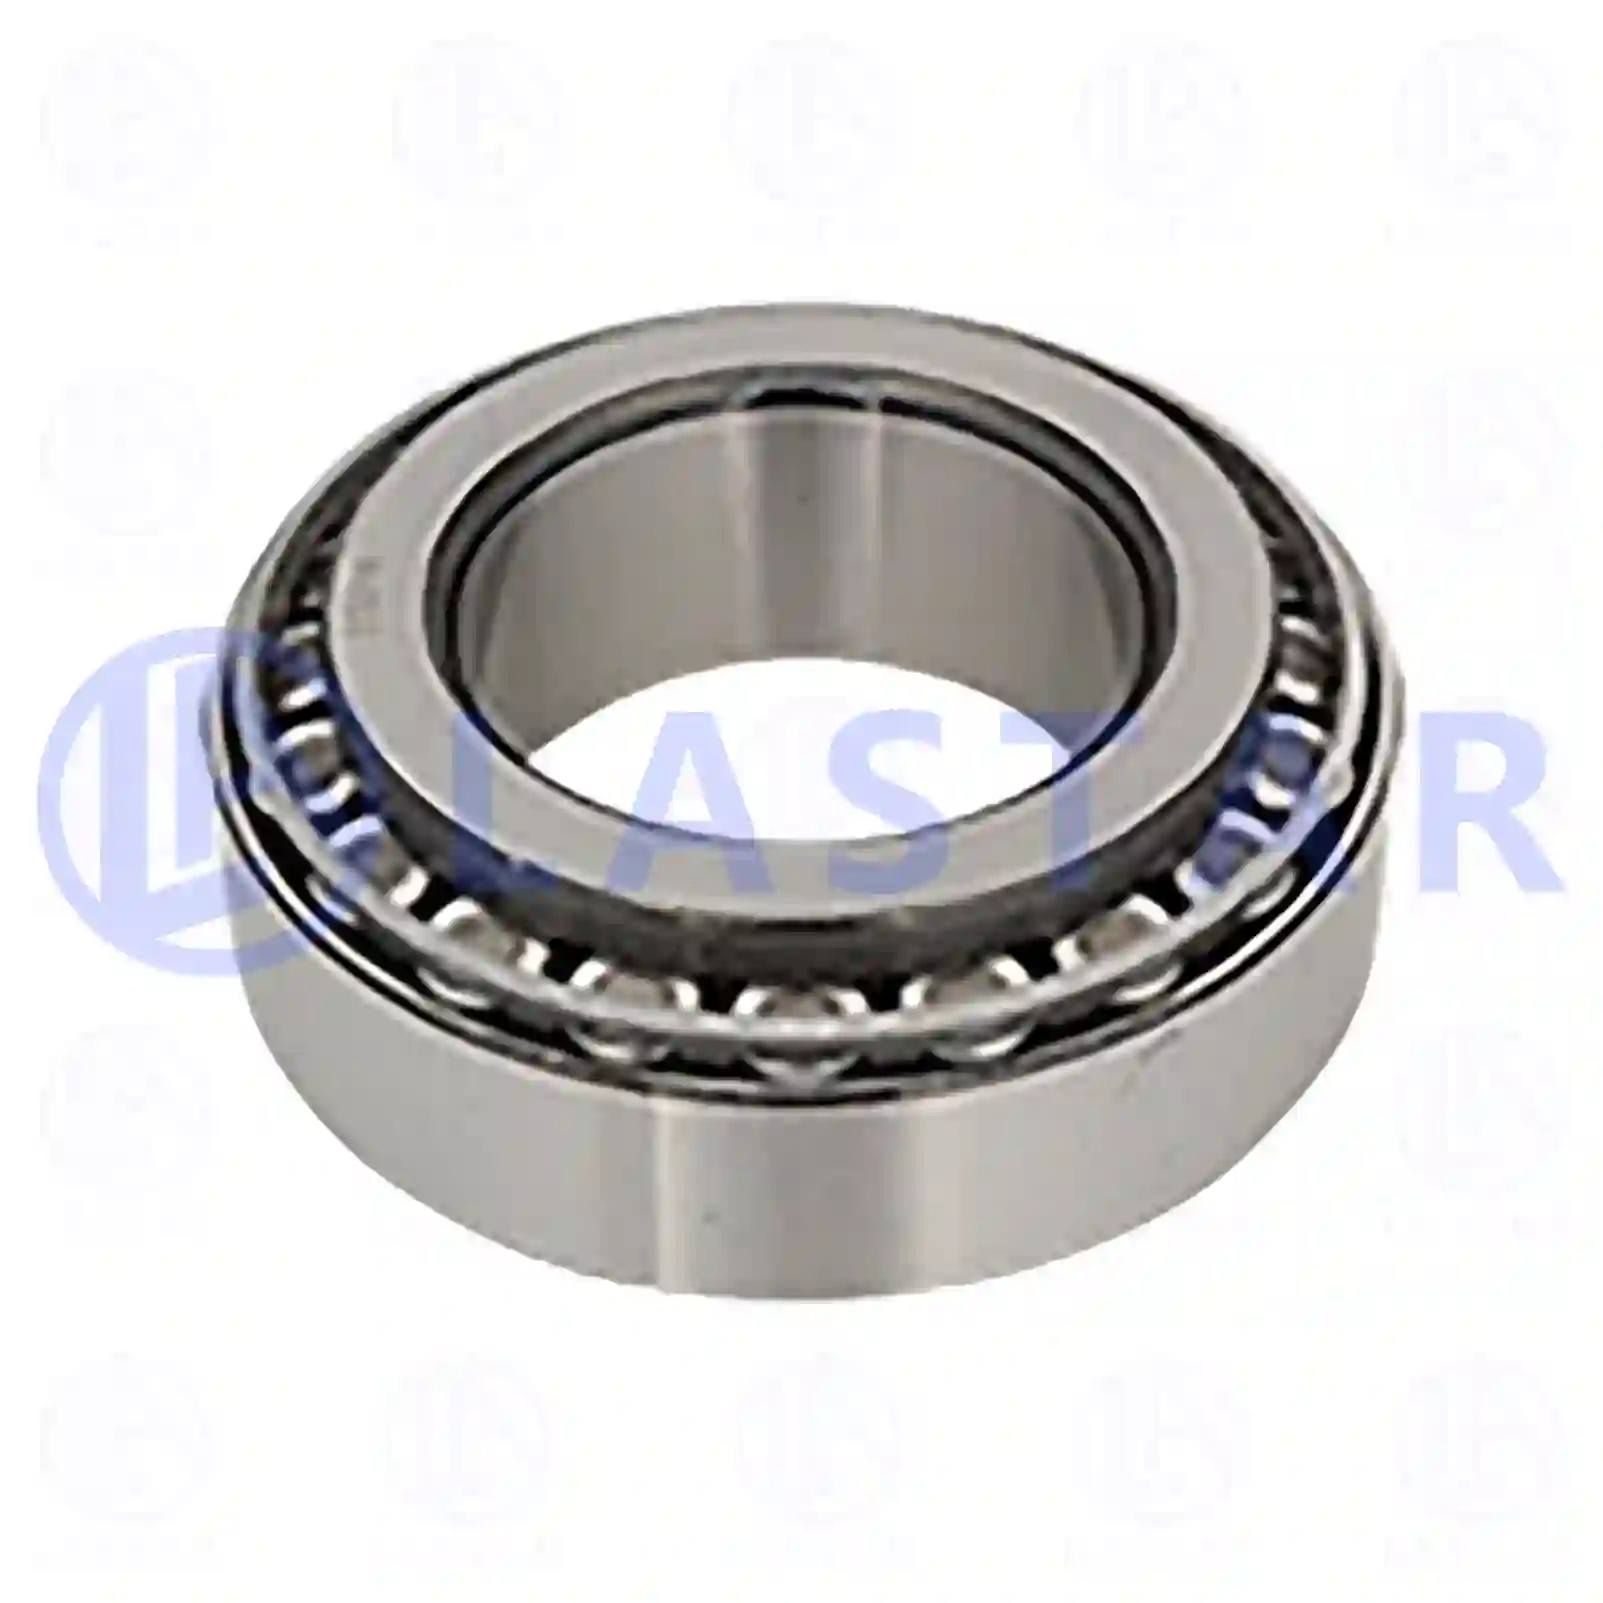 Bearings Tapered roller bearing, la no: 77724674 ,  oem no:0556290, 556290, 005103365, 00712166, 5010587008, 5000675627, 5000785898, 5000785909, 5000849617, 5010587008, 20723502, ZG03020-0008 Lastar Spare Part | Truck Spare Parts, Auotomotive Spare Parts